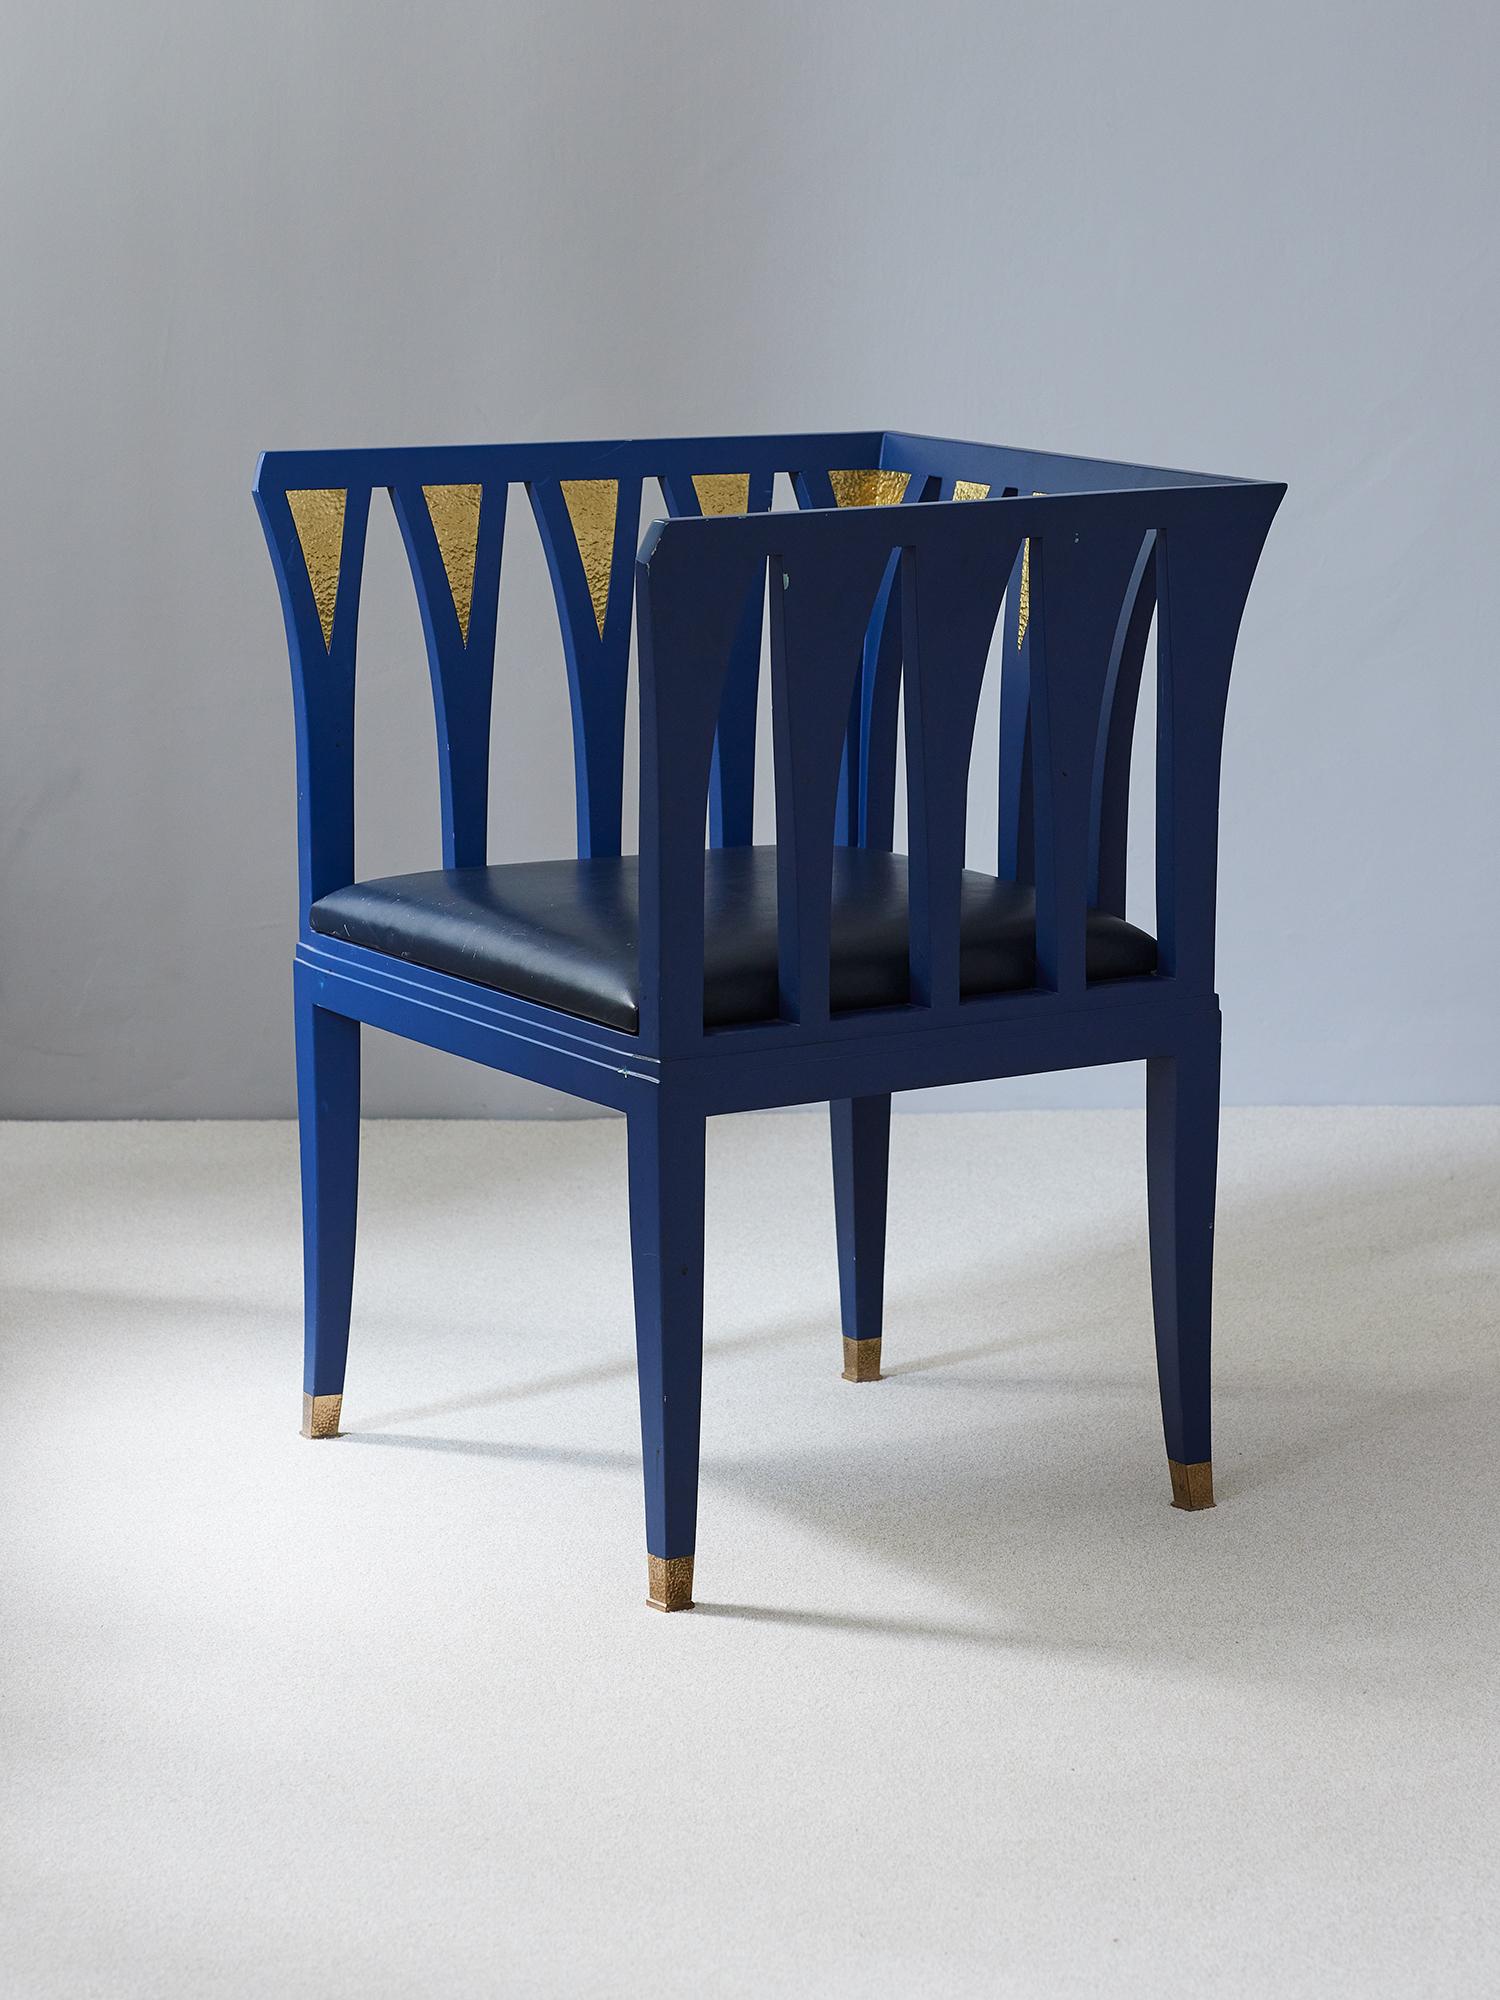 'Blue' armchair by Eliel Saarinen 1929..
Beech, painted petrol blue and gold, black leather.
Original condition, with minor signs of wear.

Originally designed for the Cranbrook Academ, Detroit, Mich, in 1929. E. Saarinen was the first